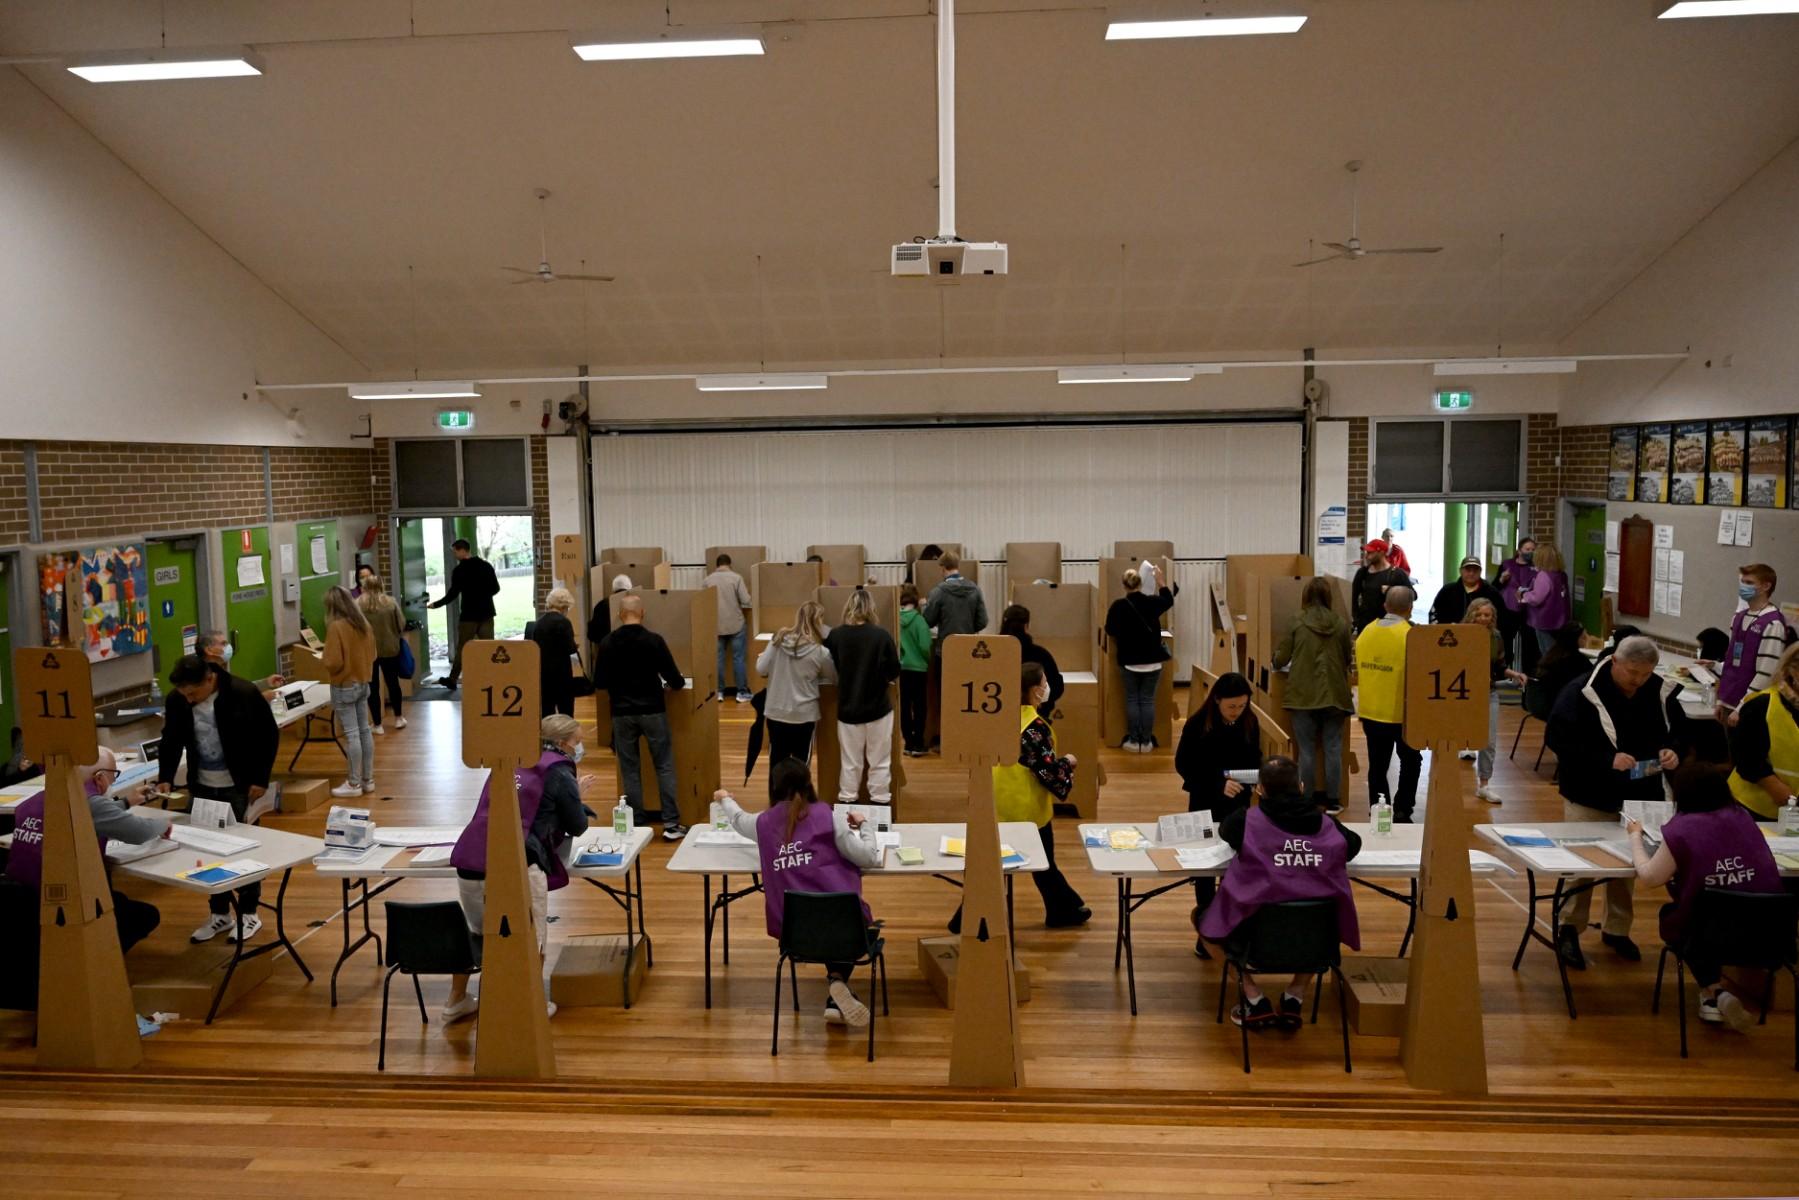 Residents cast their votes at the Australian general elections in the Cook electorate of Sydney on May 21. Photo: AFP